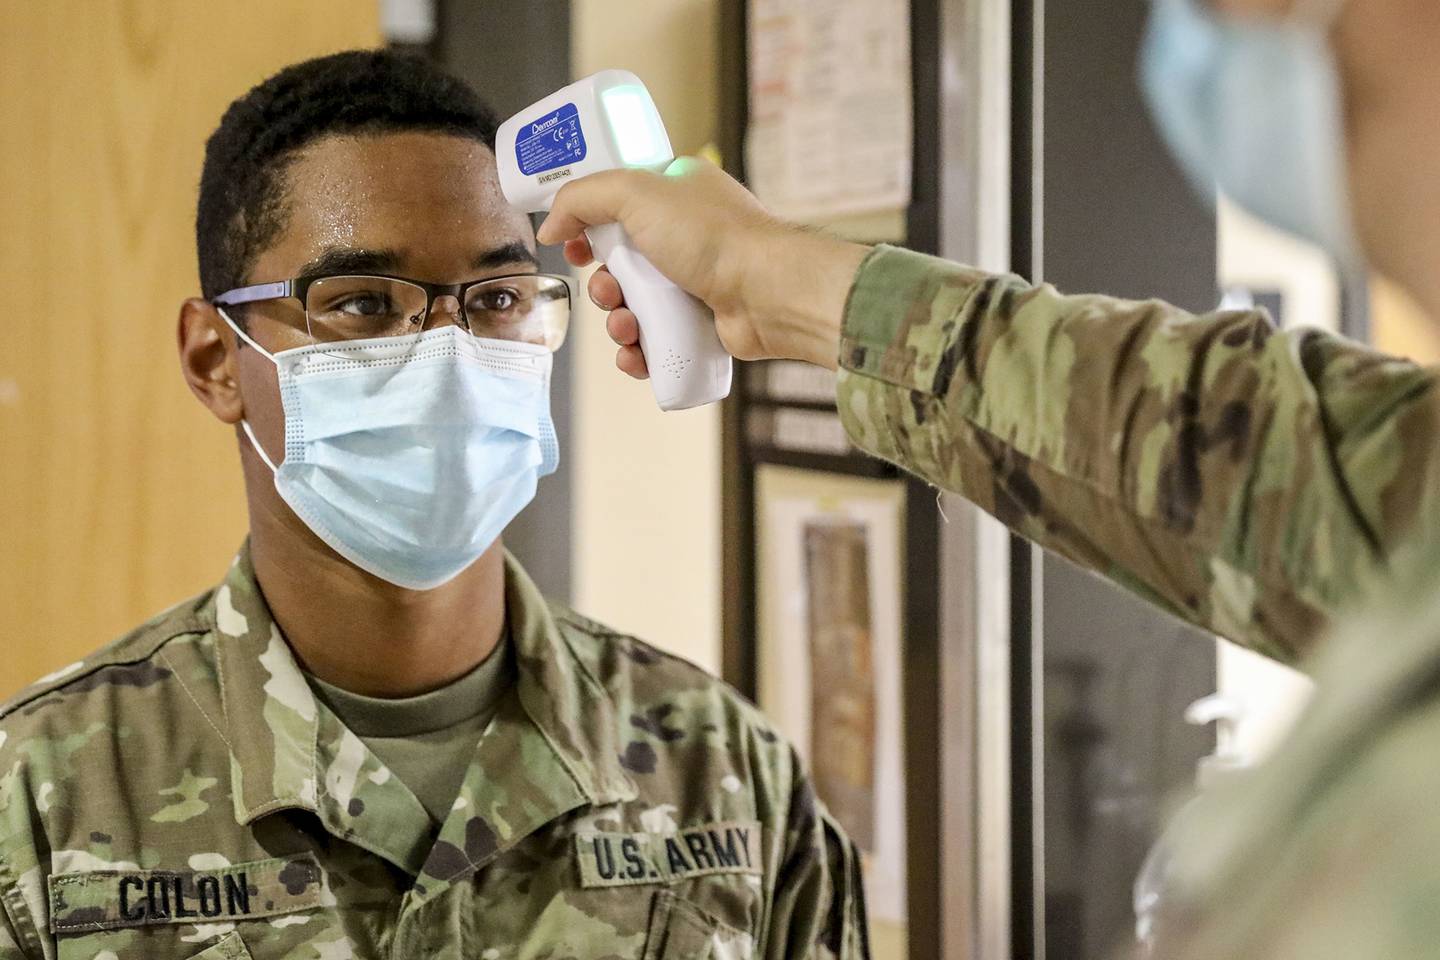 A soldier has his temperature taken during screenings for COVID-19 at Fort Hood, Texas, July 13, 2020.